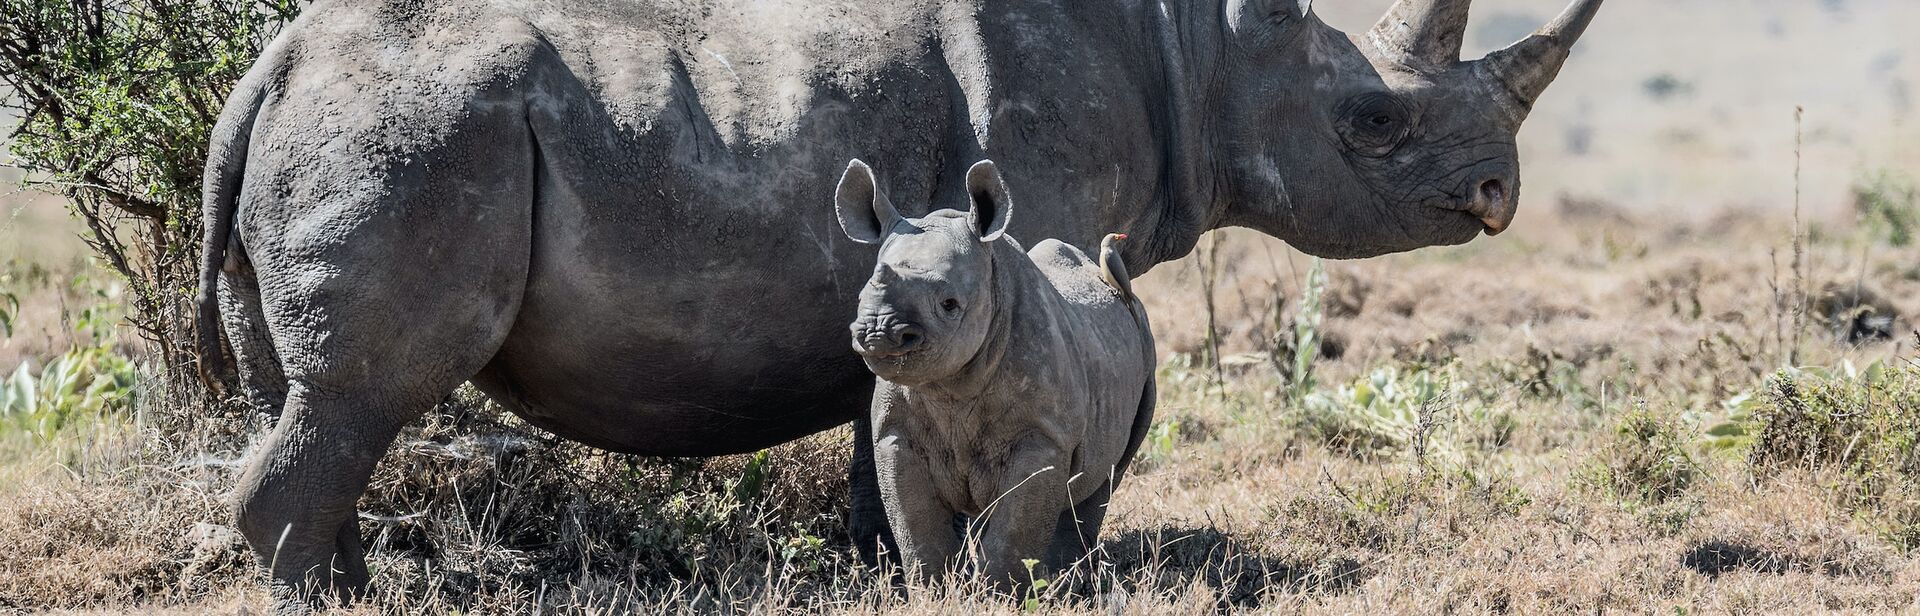 An adult and baby rhino stand in a grassy area